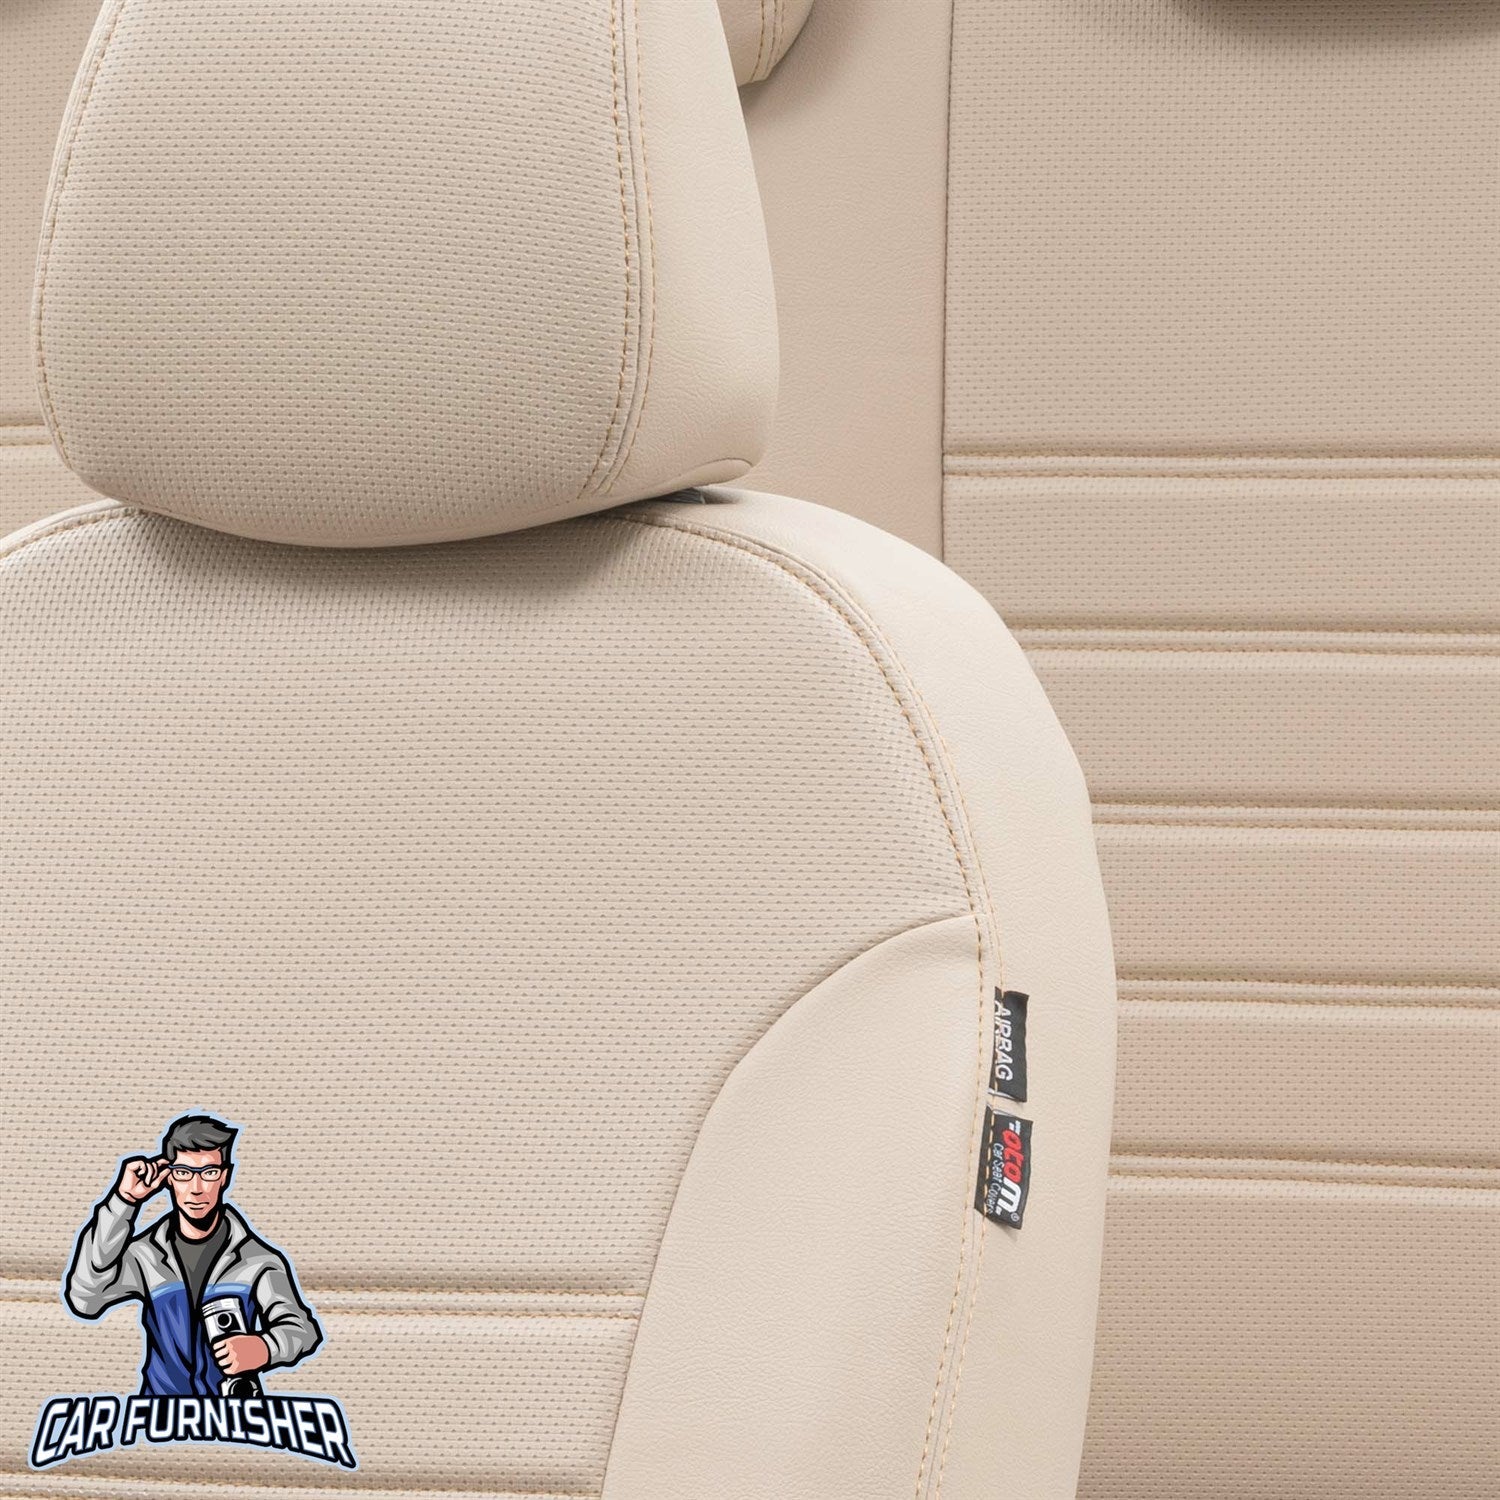 Volkswagen Scirocco Seat Cover New York Leather Design Beige Leather